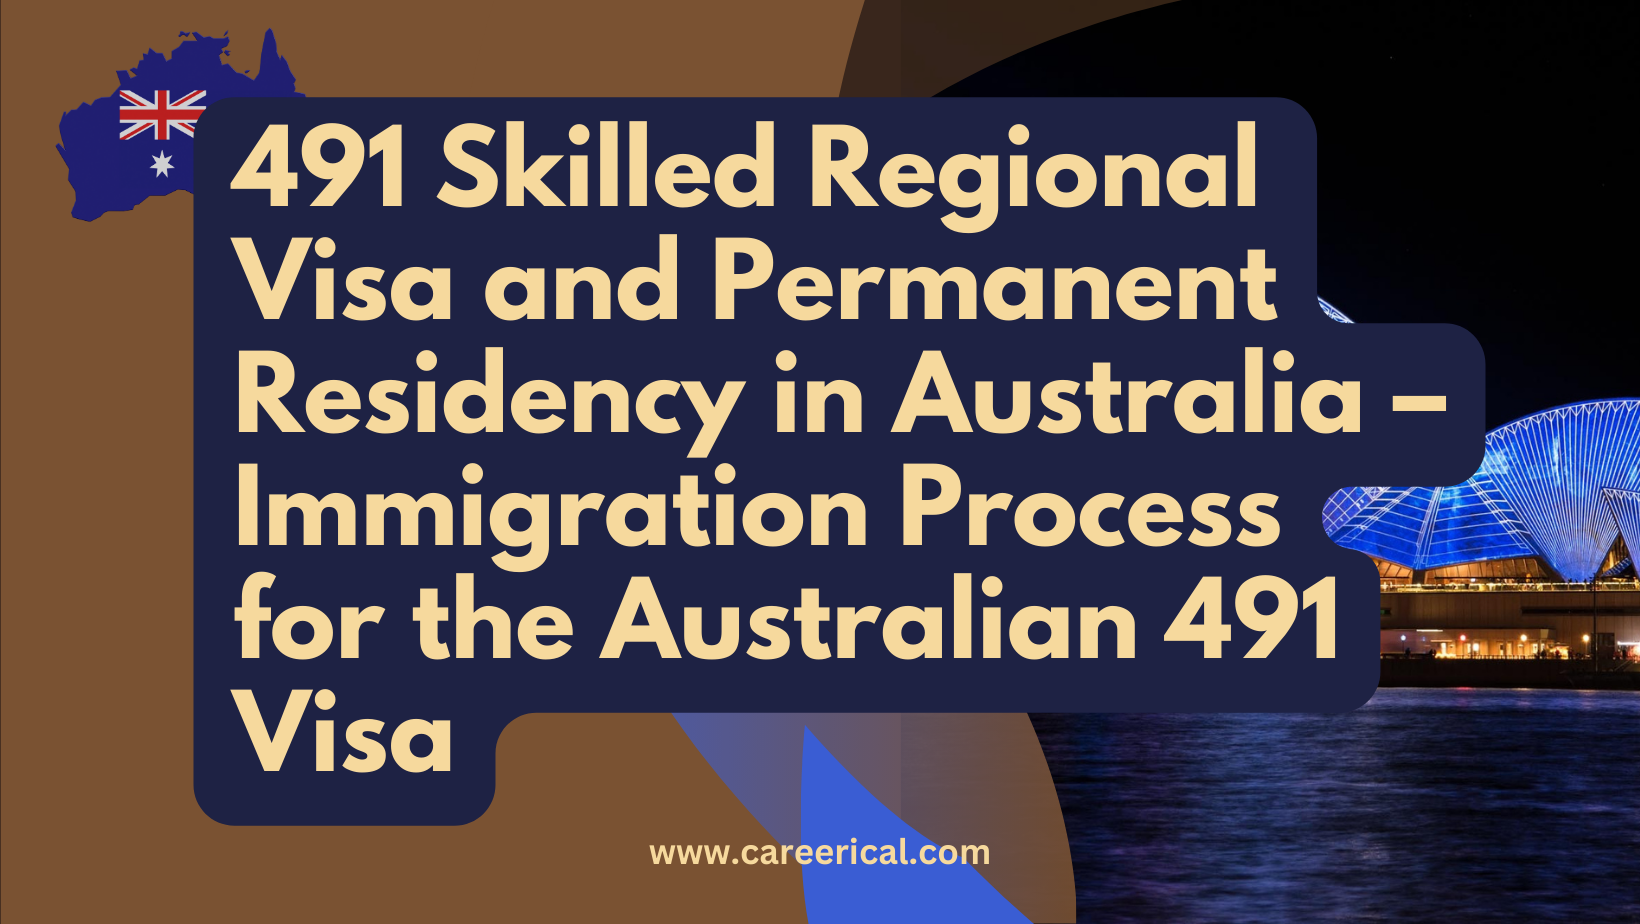 491 Skilled Regional Visa and Permanent Residency in Australia – Immigration Process for the Australian 491 Visa